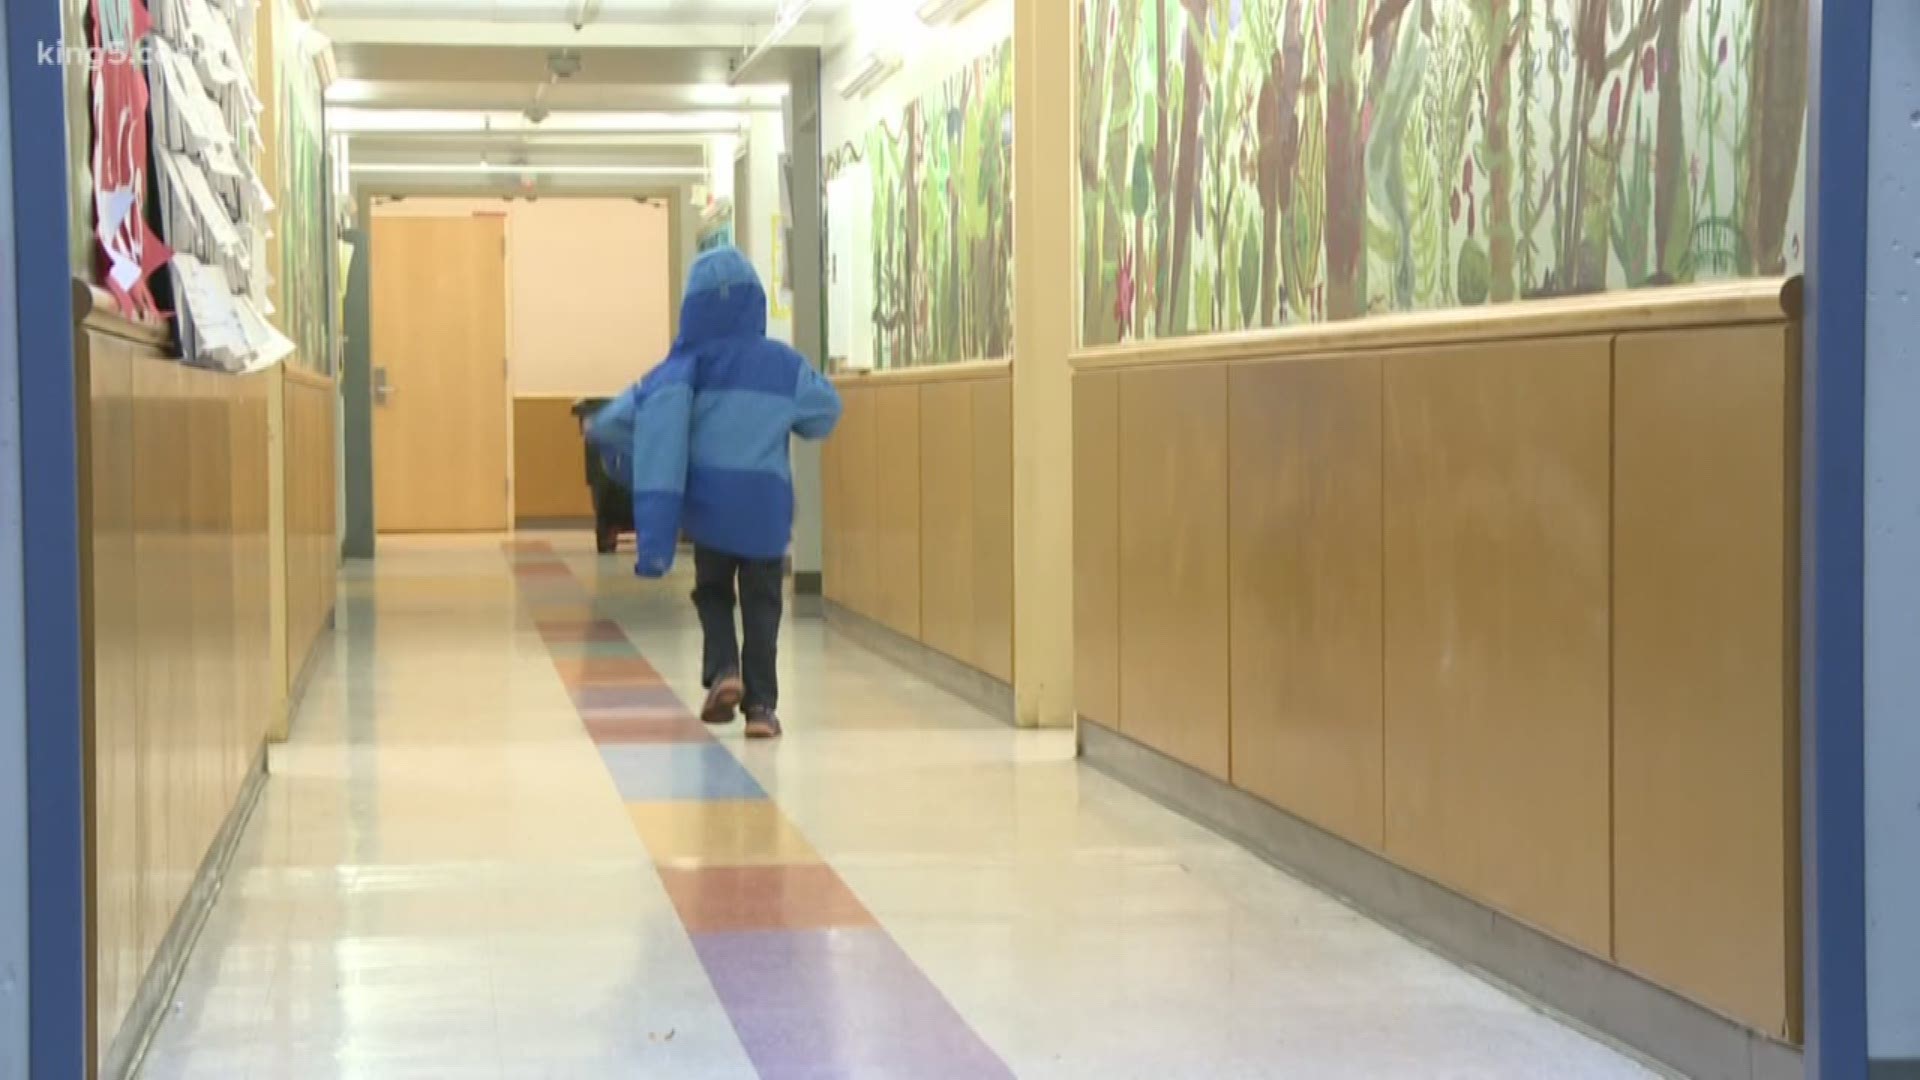 Seattle Children's Odessa Brown Children's Clinic has become a vital service in Seattle schools, helping our next generation with mental health as well as physical health needs. KING 5's Amity Addrisi has the story in Healthlink. This story is sponsored by Seattle Children's.